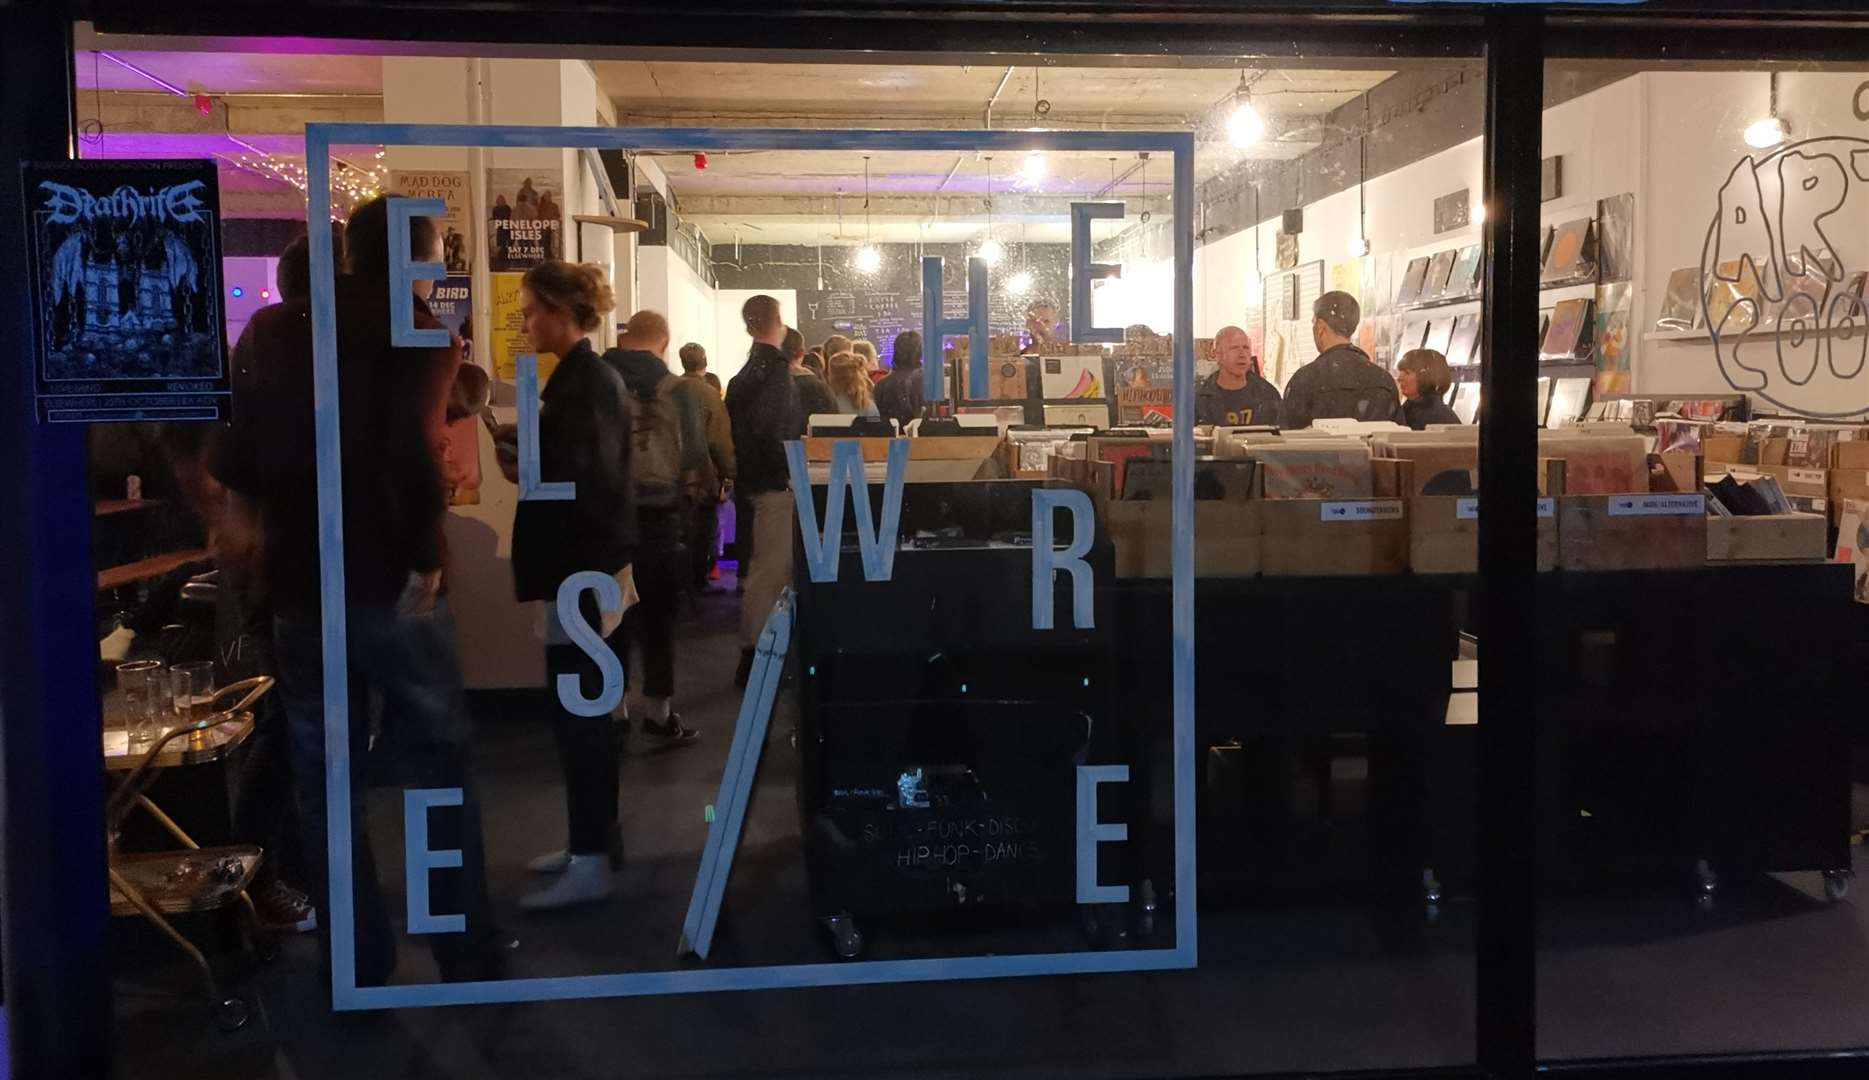 Elsewhere is become a go-to place for cutting edge music